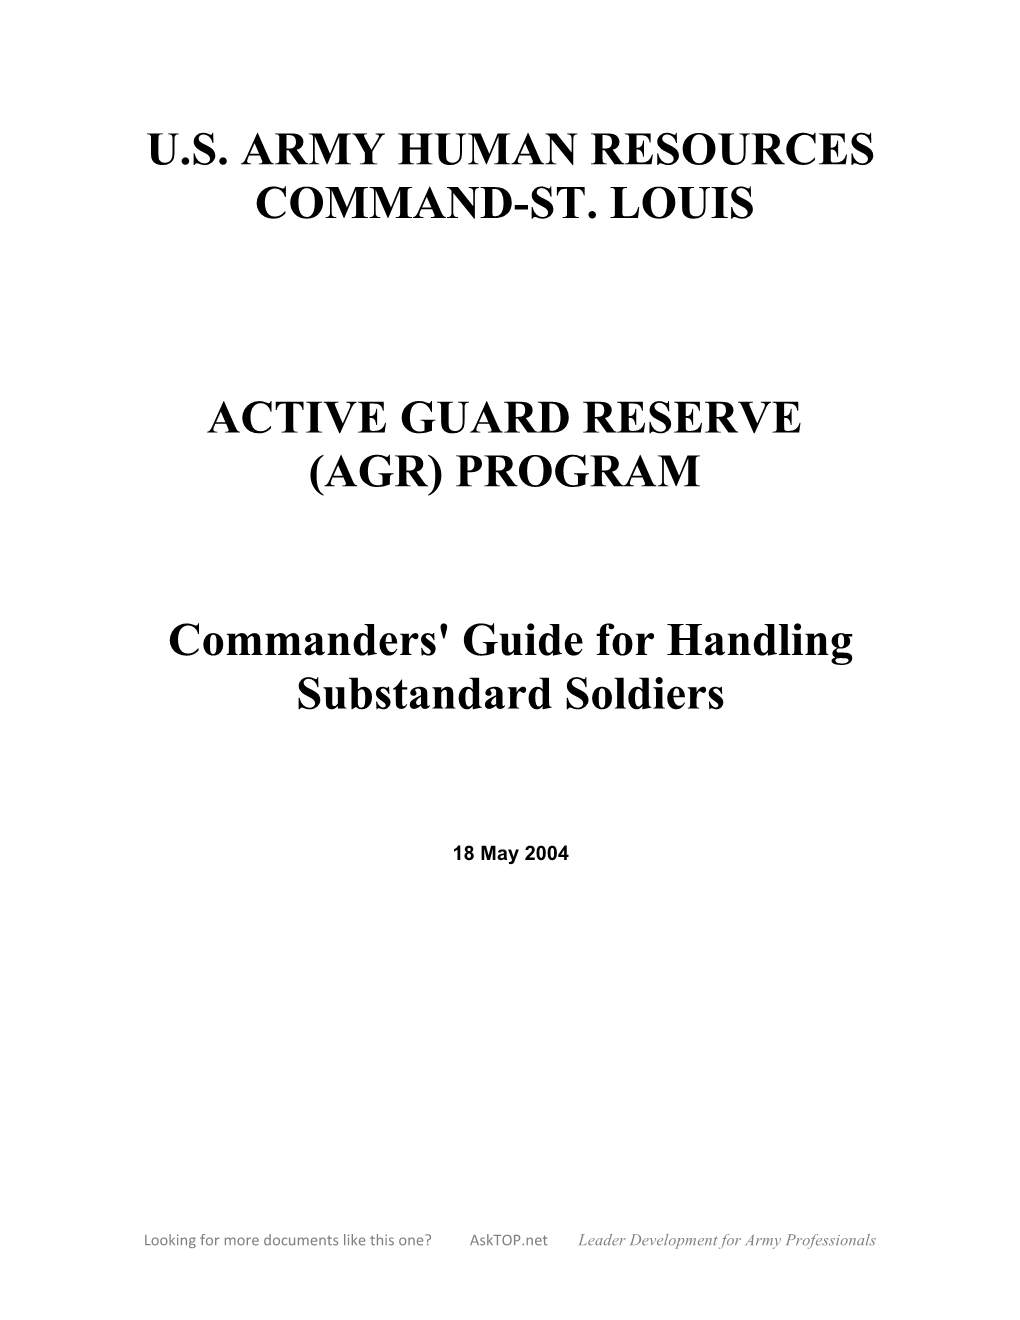 U.S. Army Human Resources Command-St. Louis